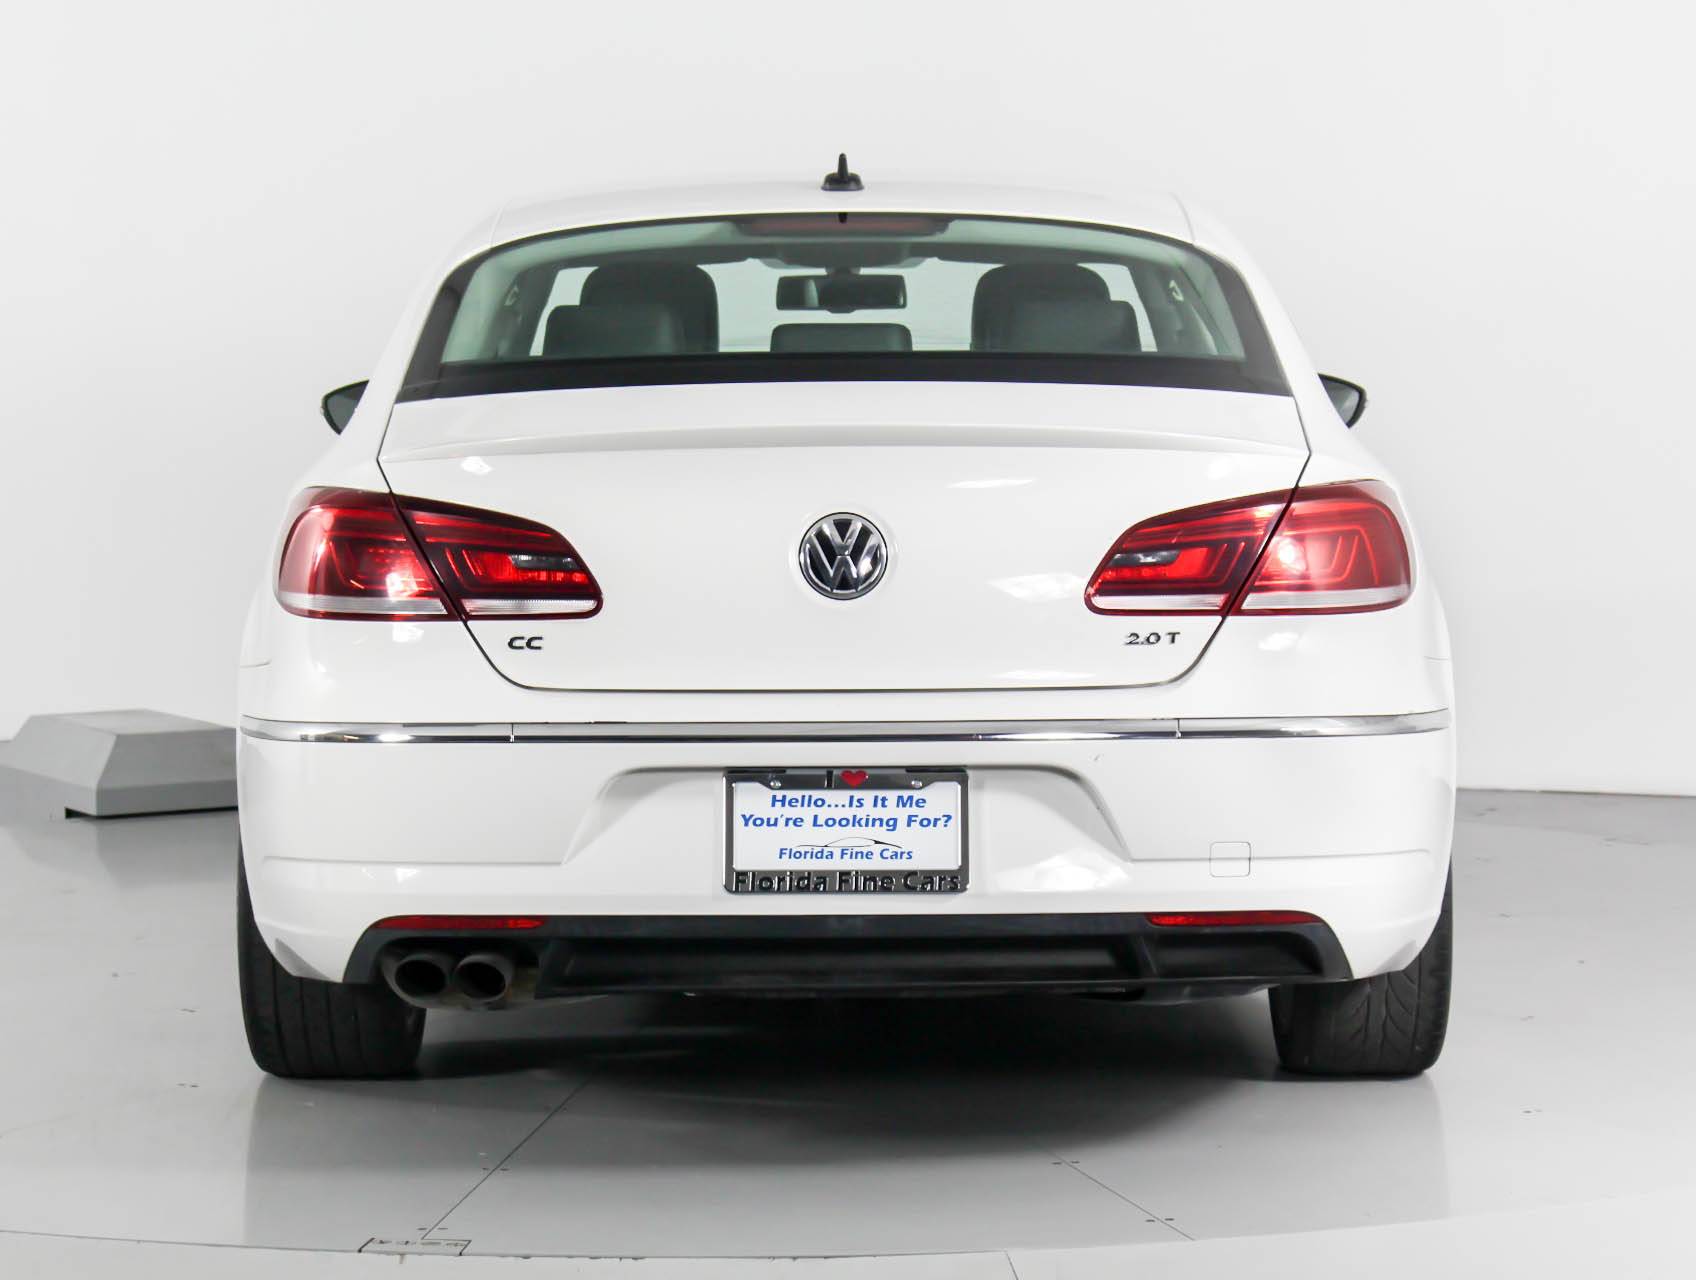 Used 2013 VOLKSWAGEN CC 2.0t Sport Plus for sale in WEST PALM